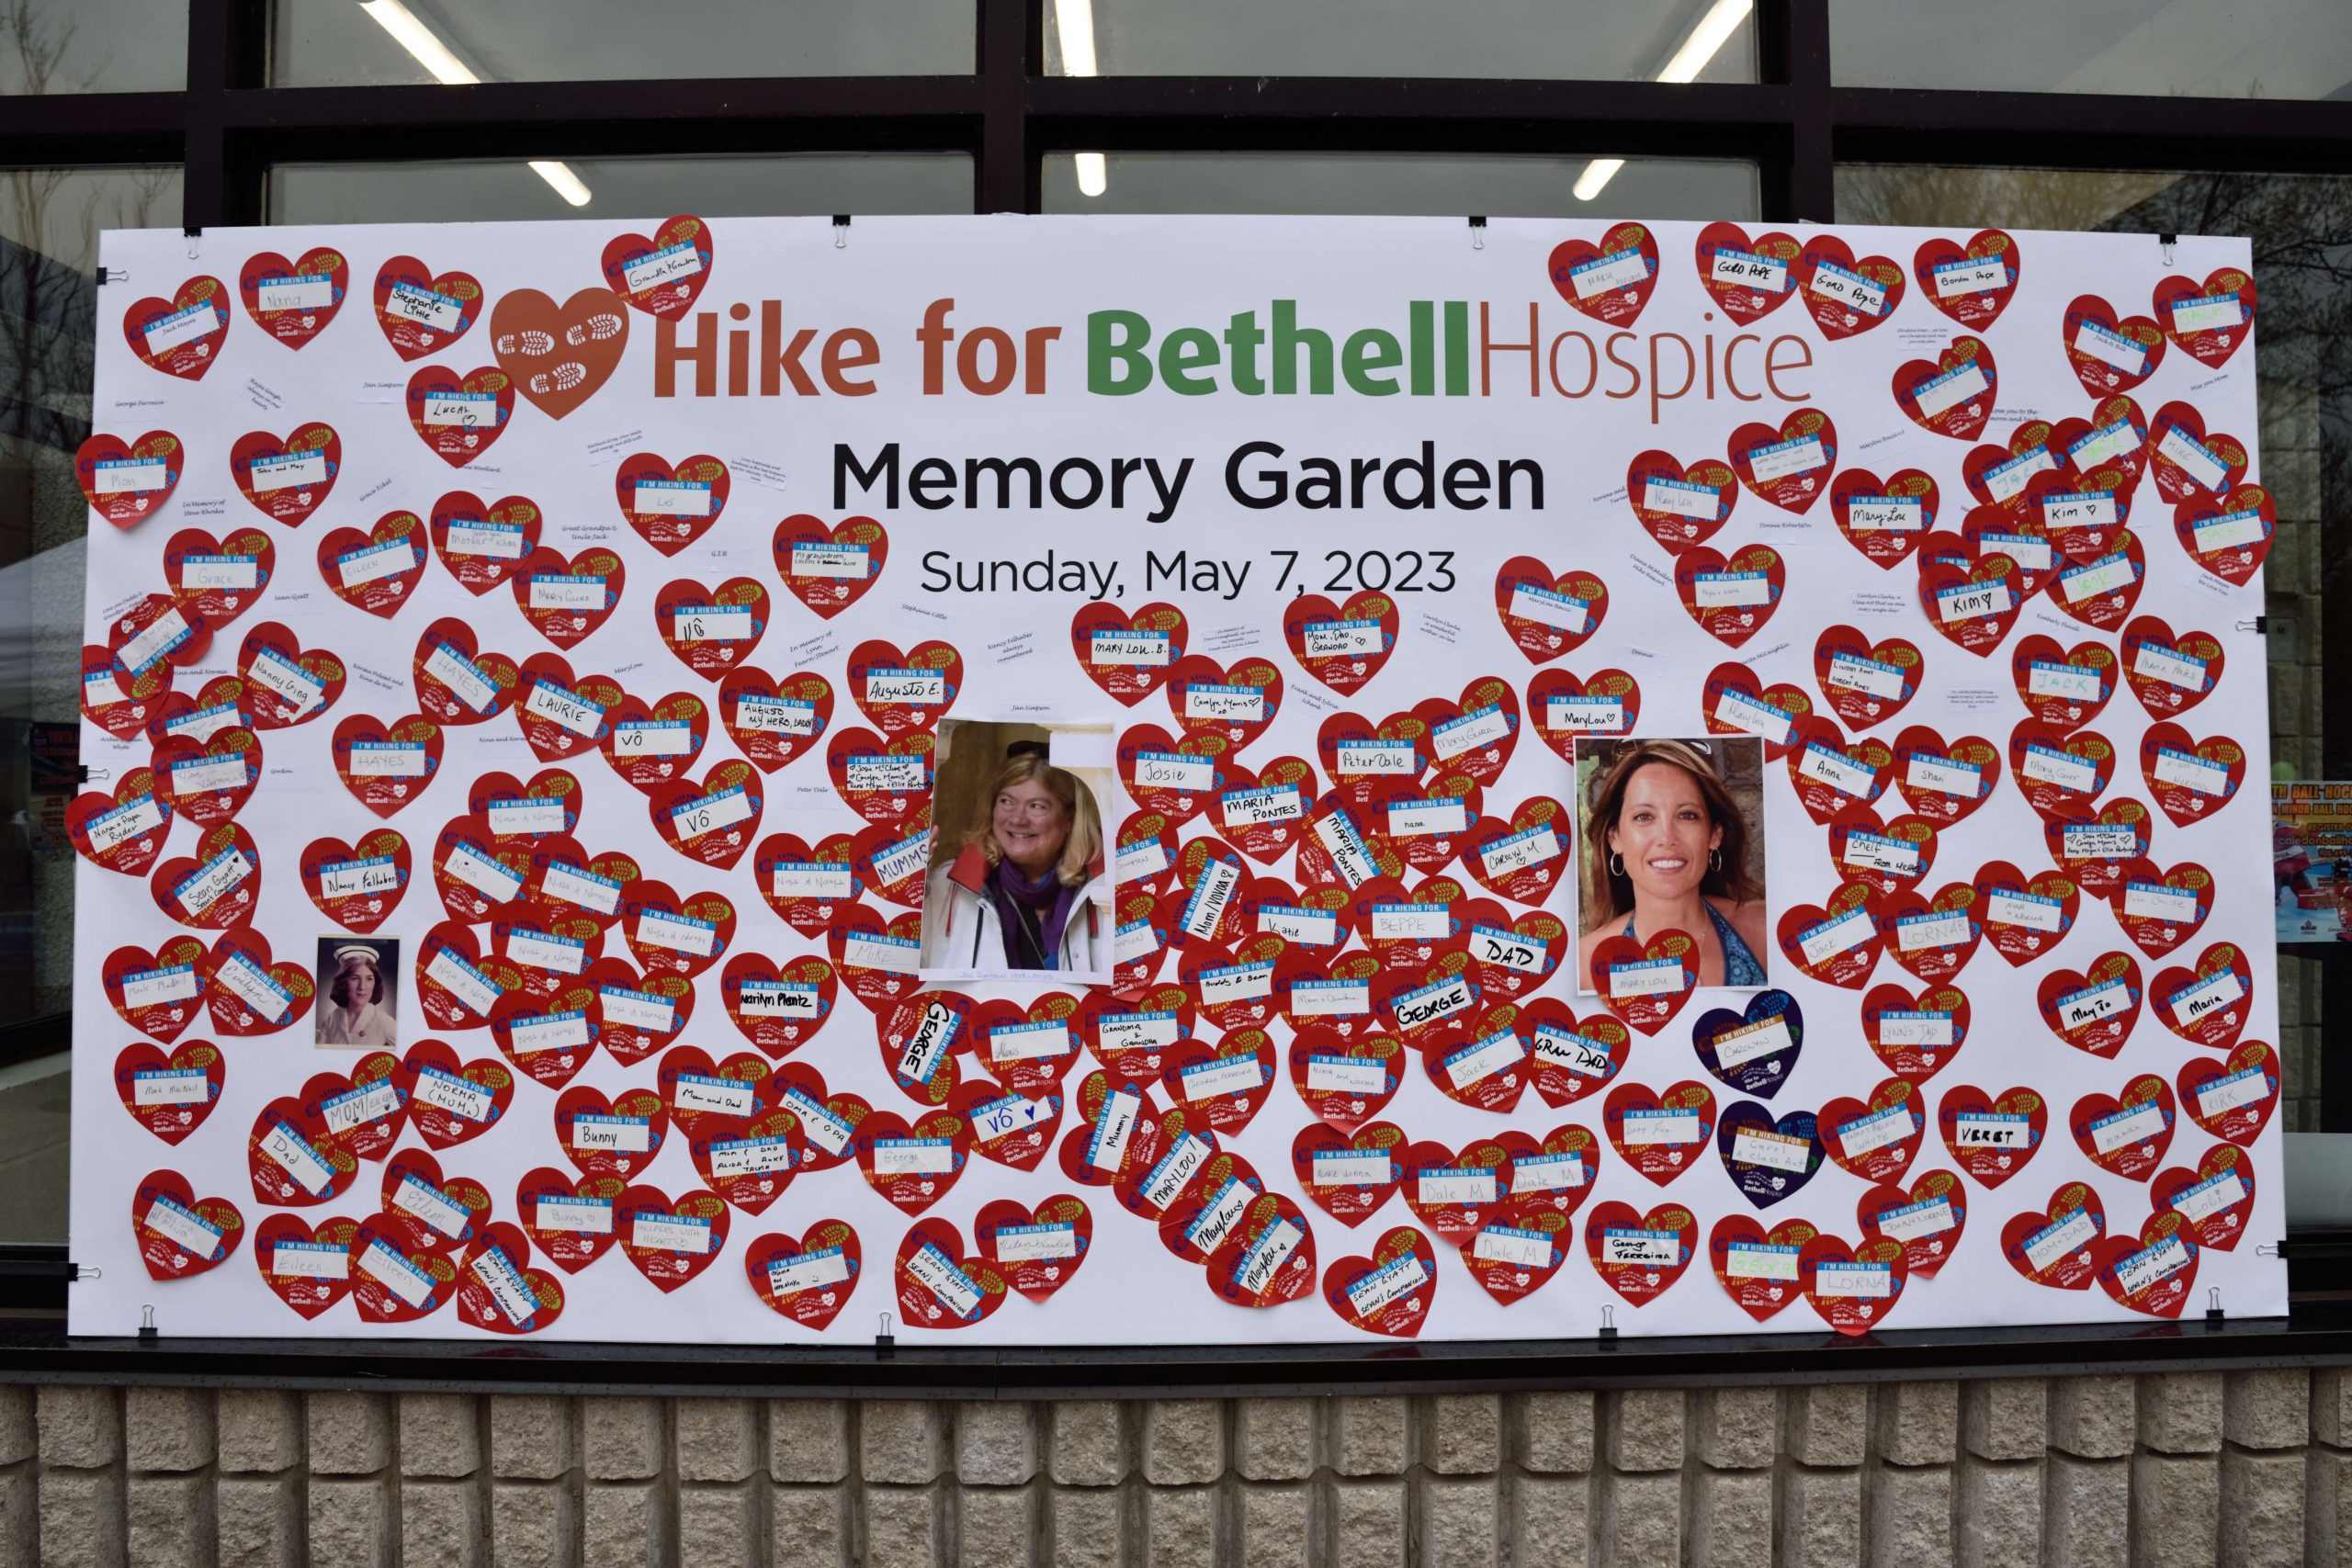 large poster on the windows of a store front with small hearts covering it and the words Hike for Bethell Hospice Memory Garden